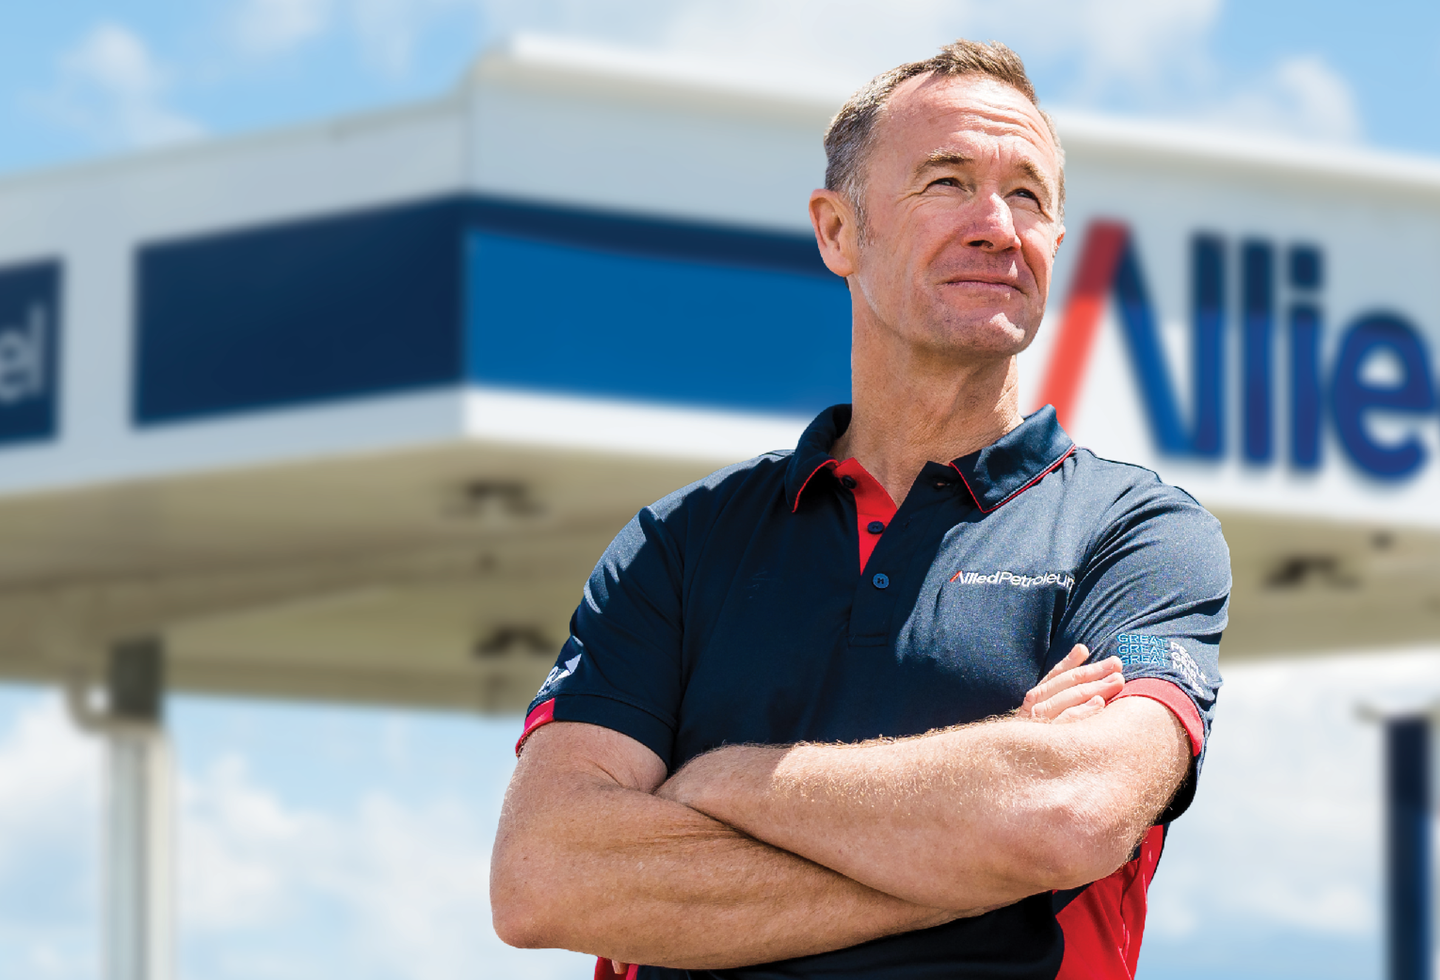 Greg Murphy standing in front of Allied Petroleum fuel station